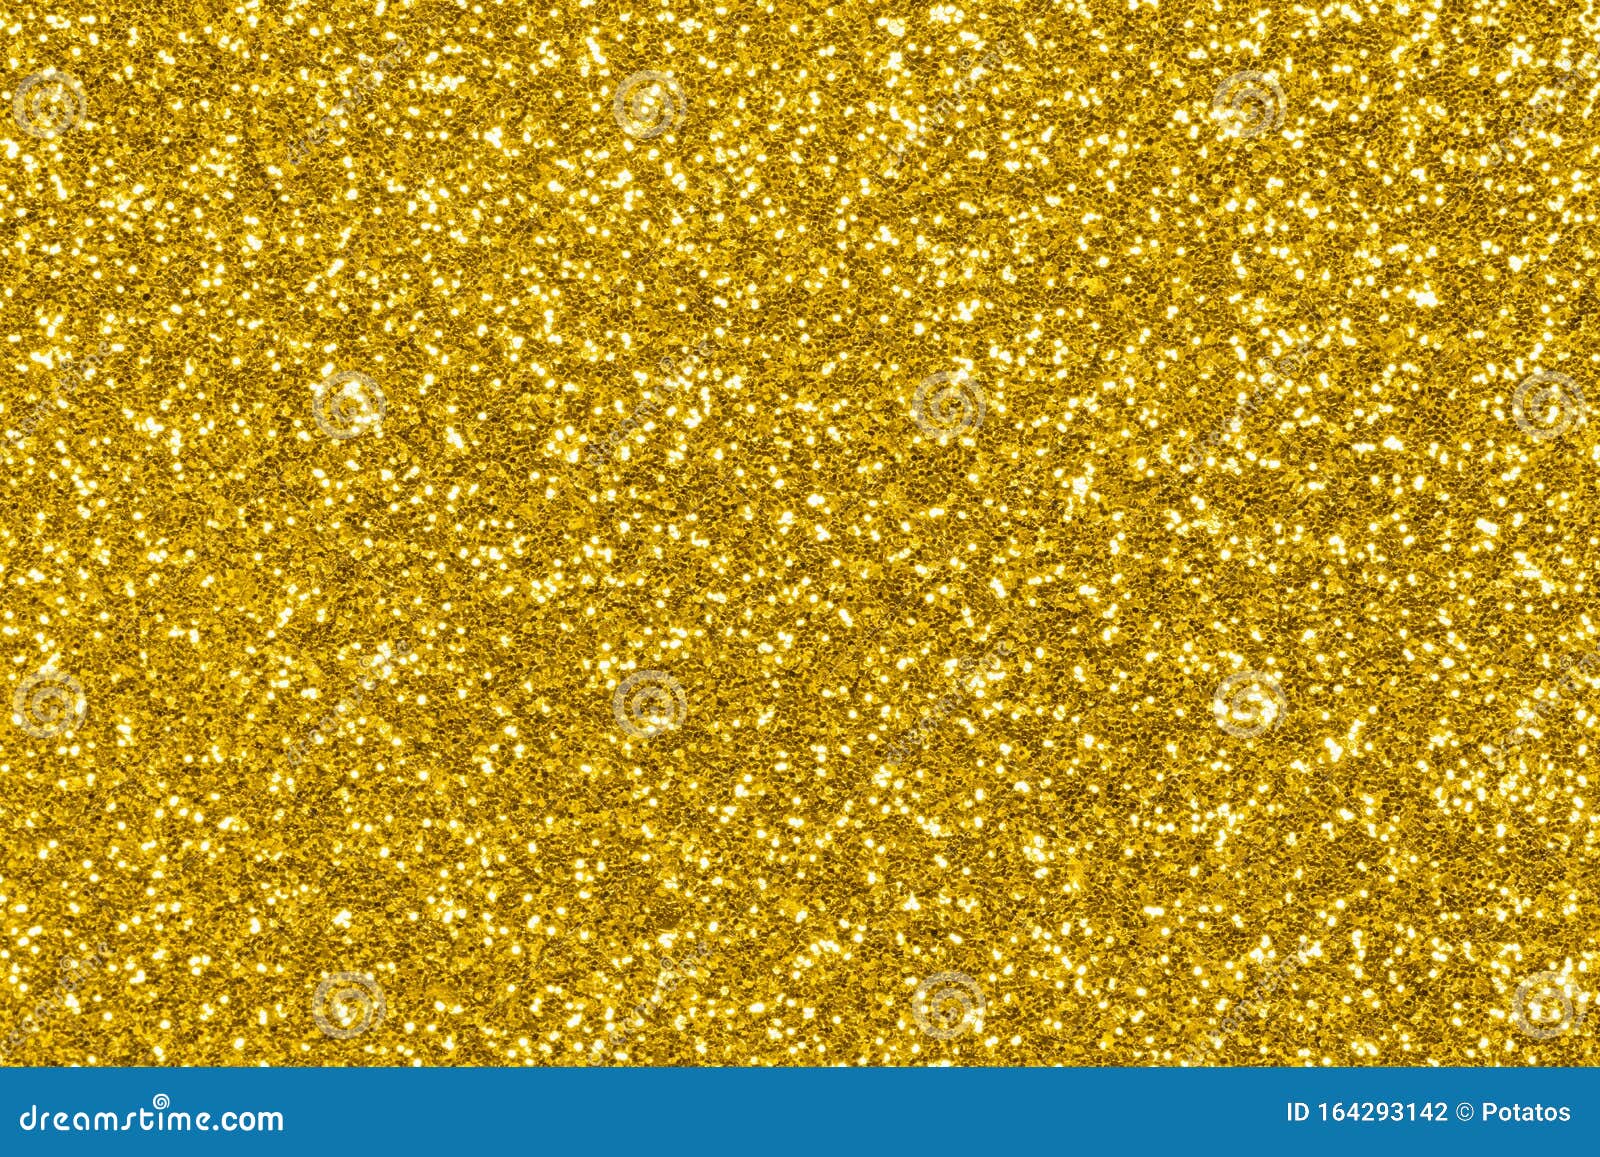 Gold Glitter Background. Holiday Sparkle Lights Stock Photo - Image of  foil, metallic: 164293142